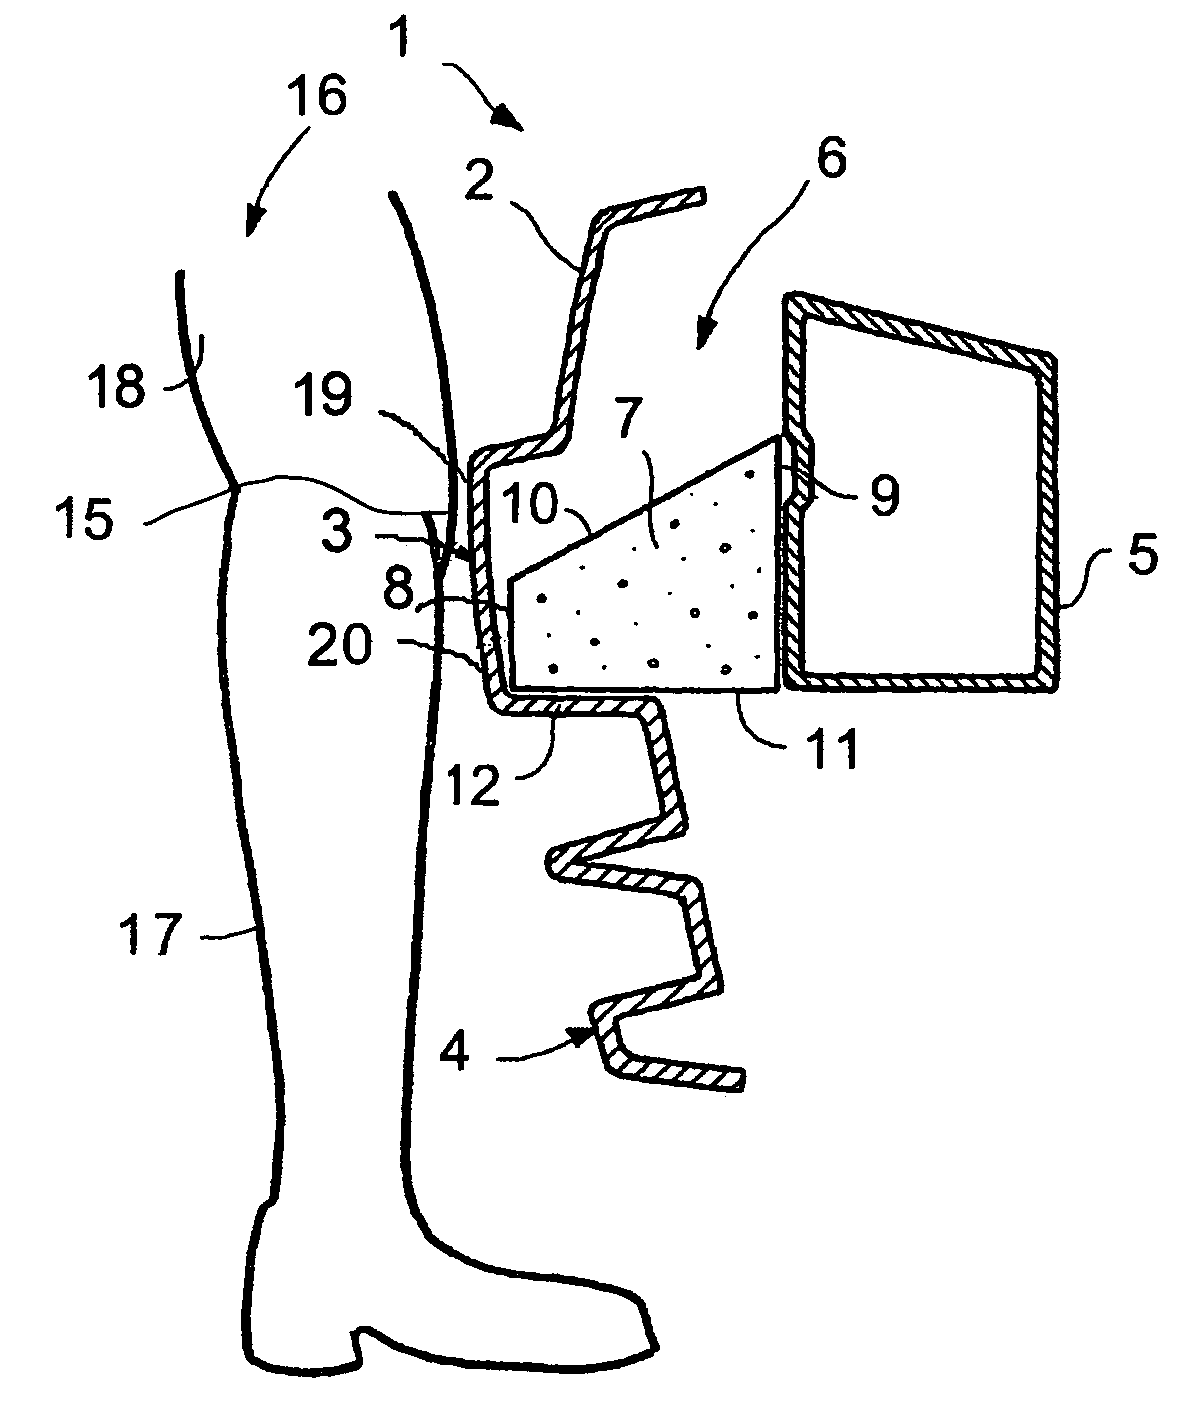 Passive safety device